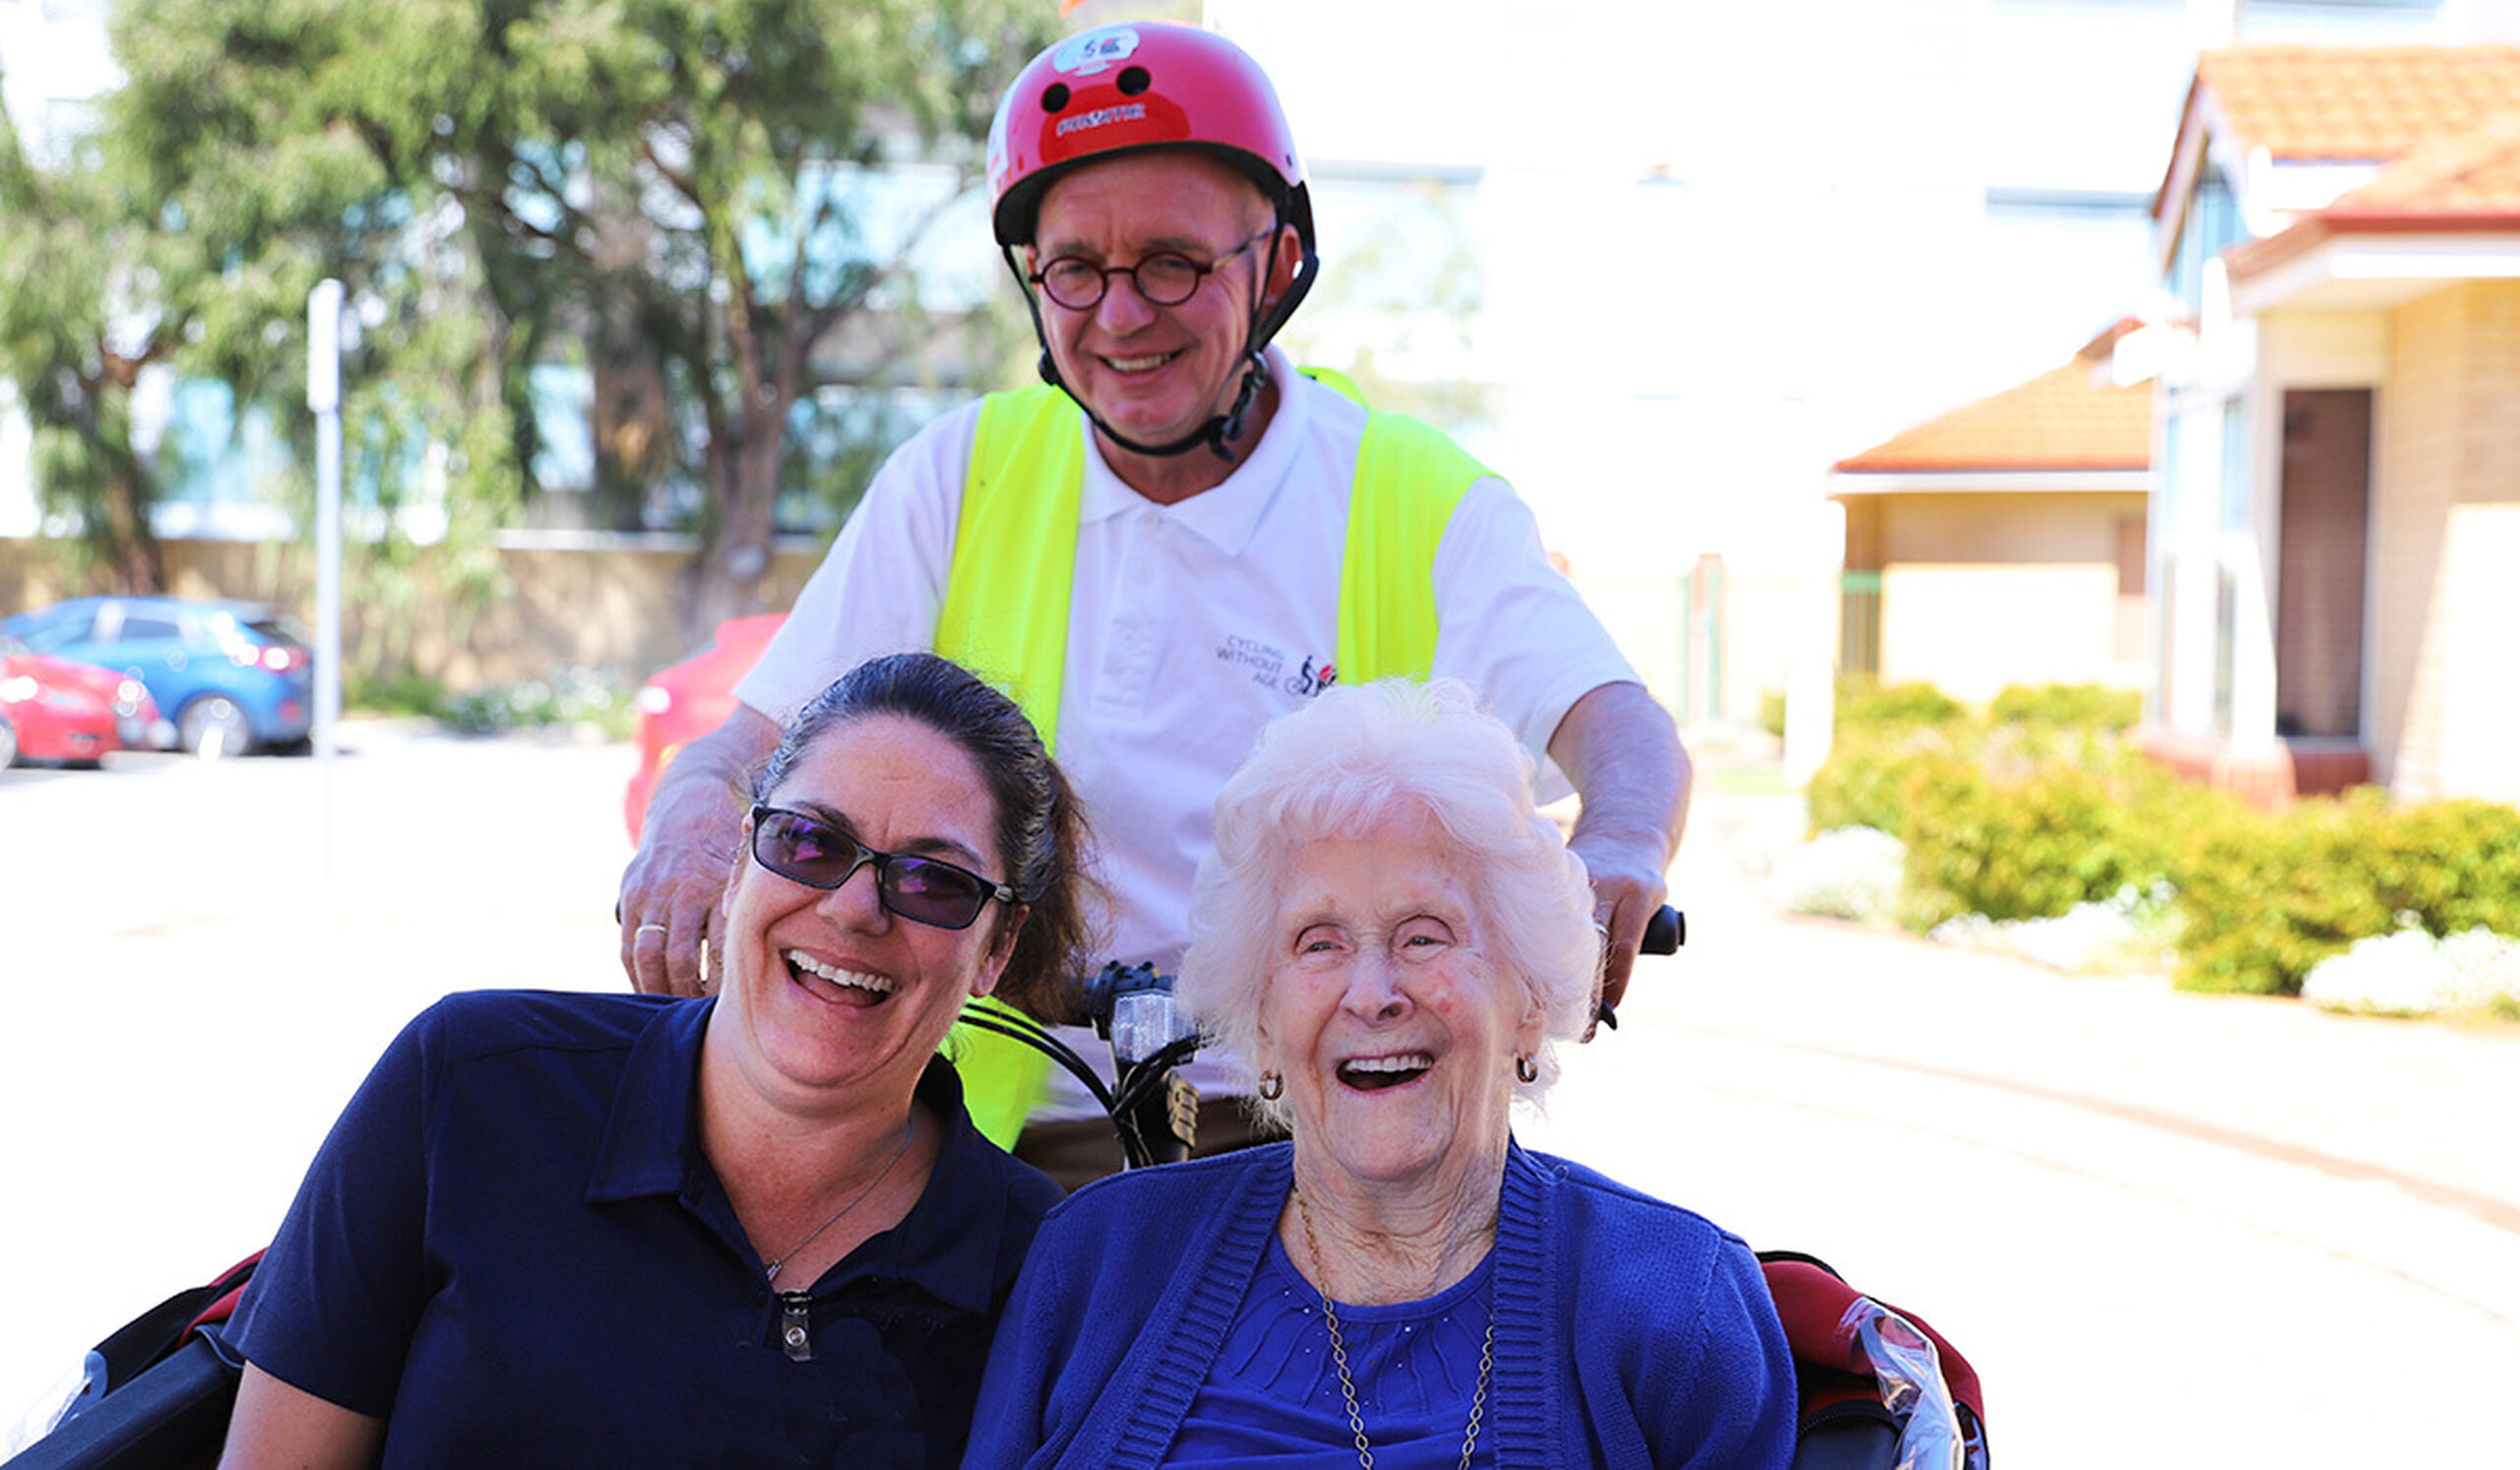 Pedal power arrives at Gracehaven Residential Care in Rockingham